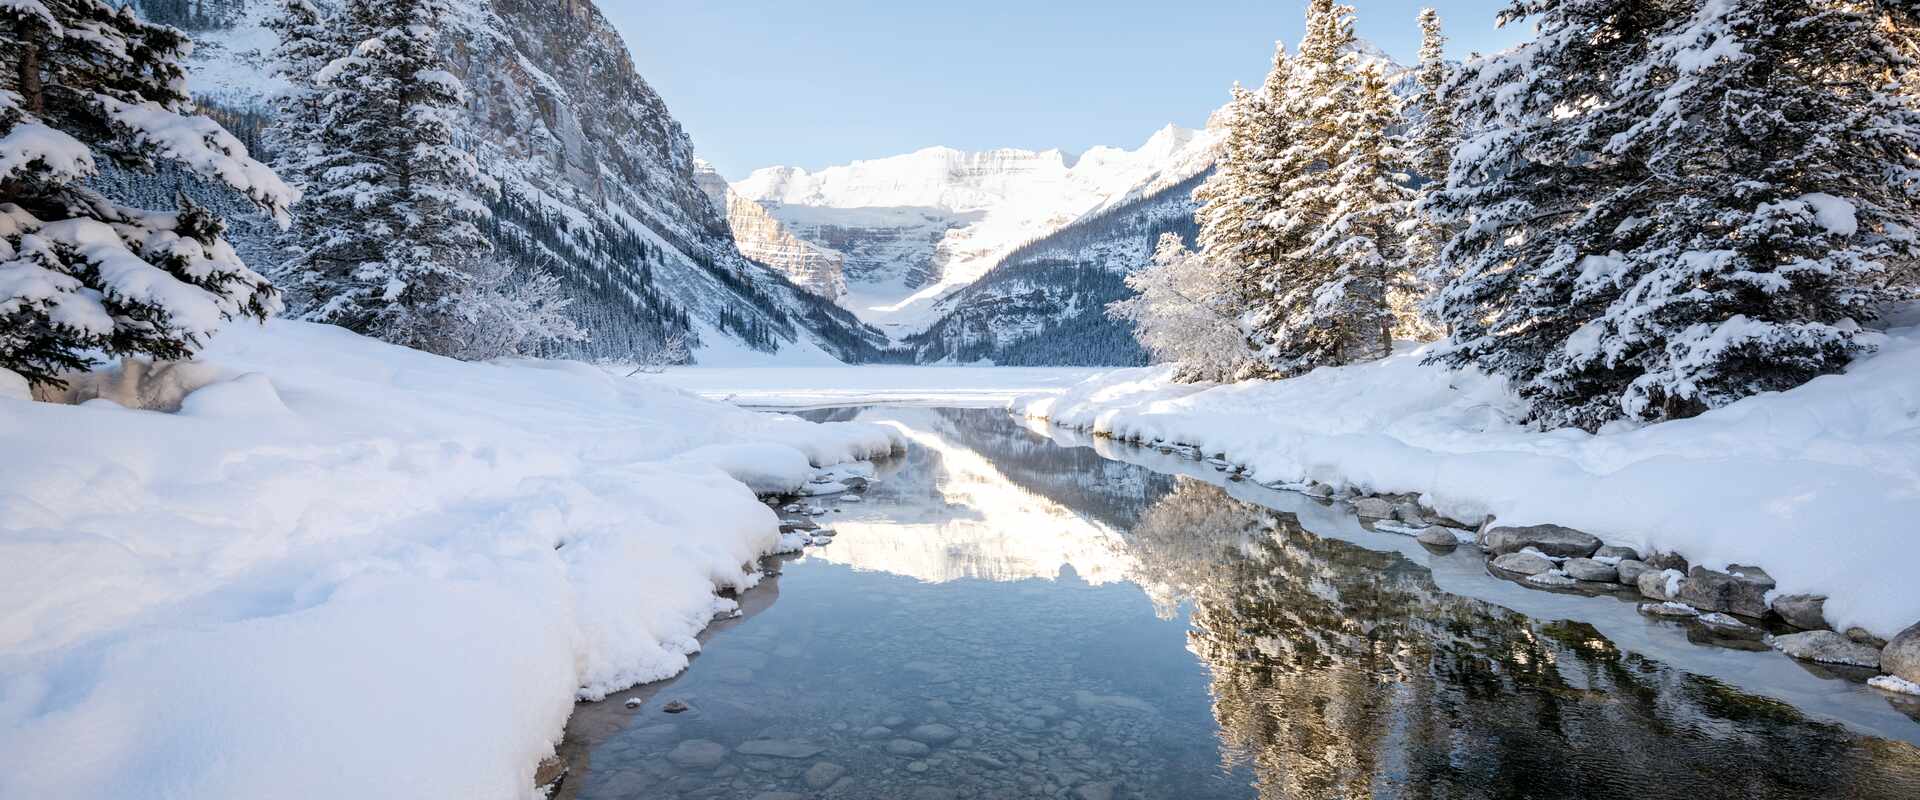 View of Lake Louise in winter, Canada